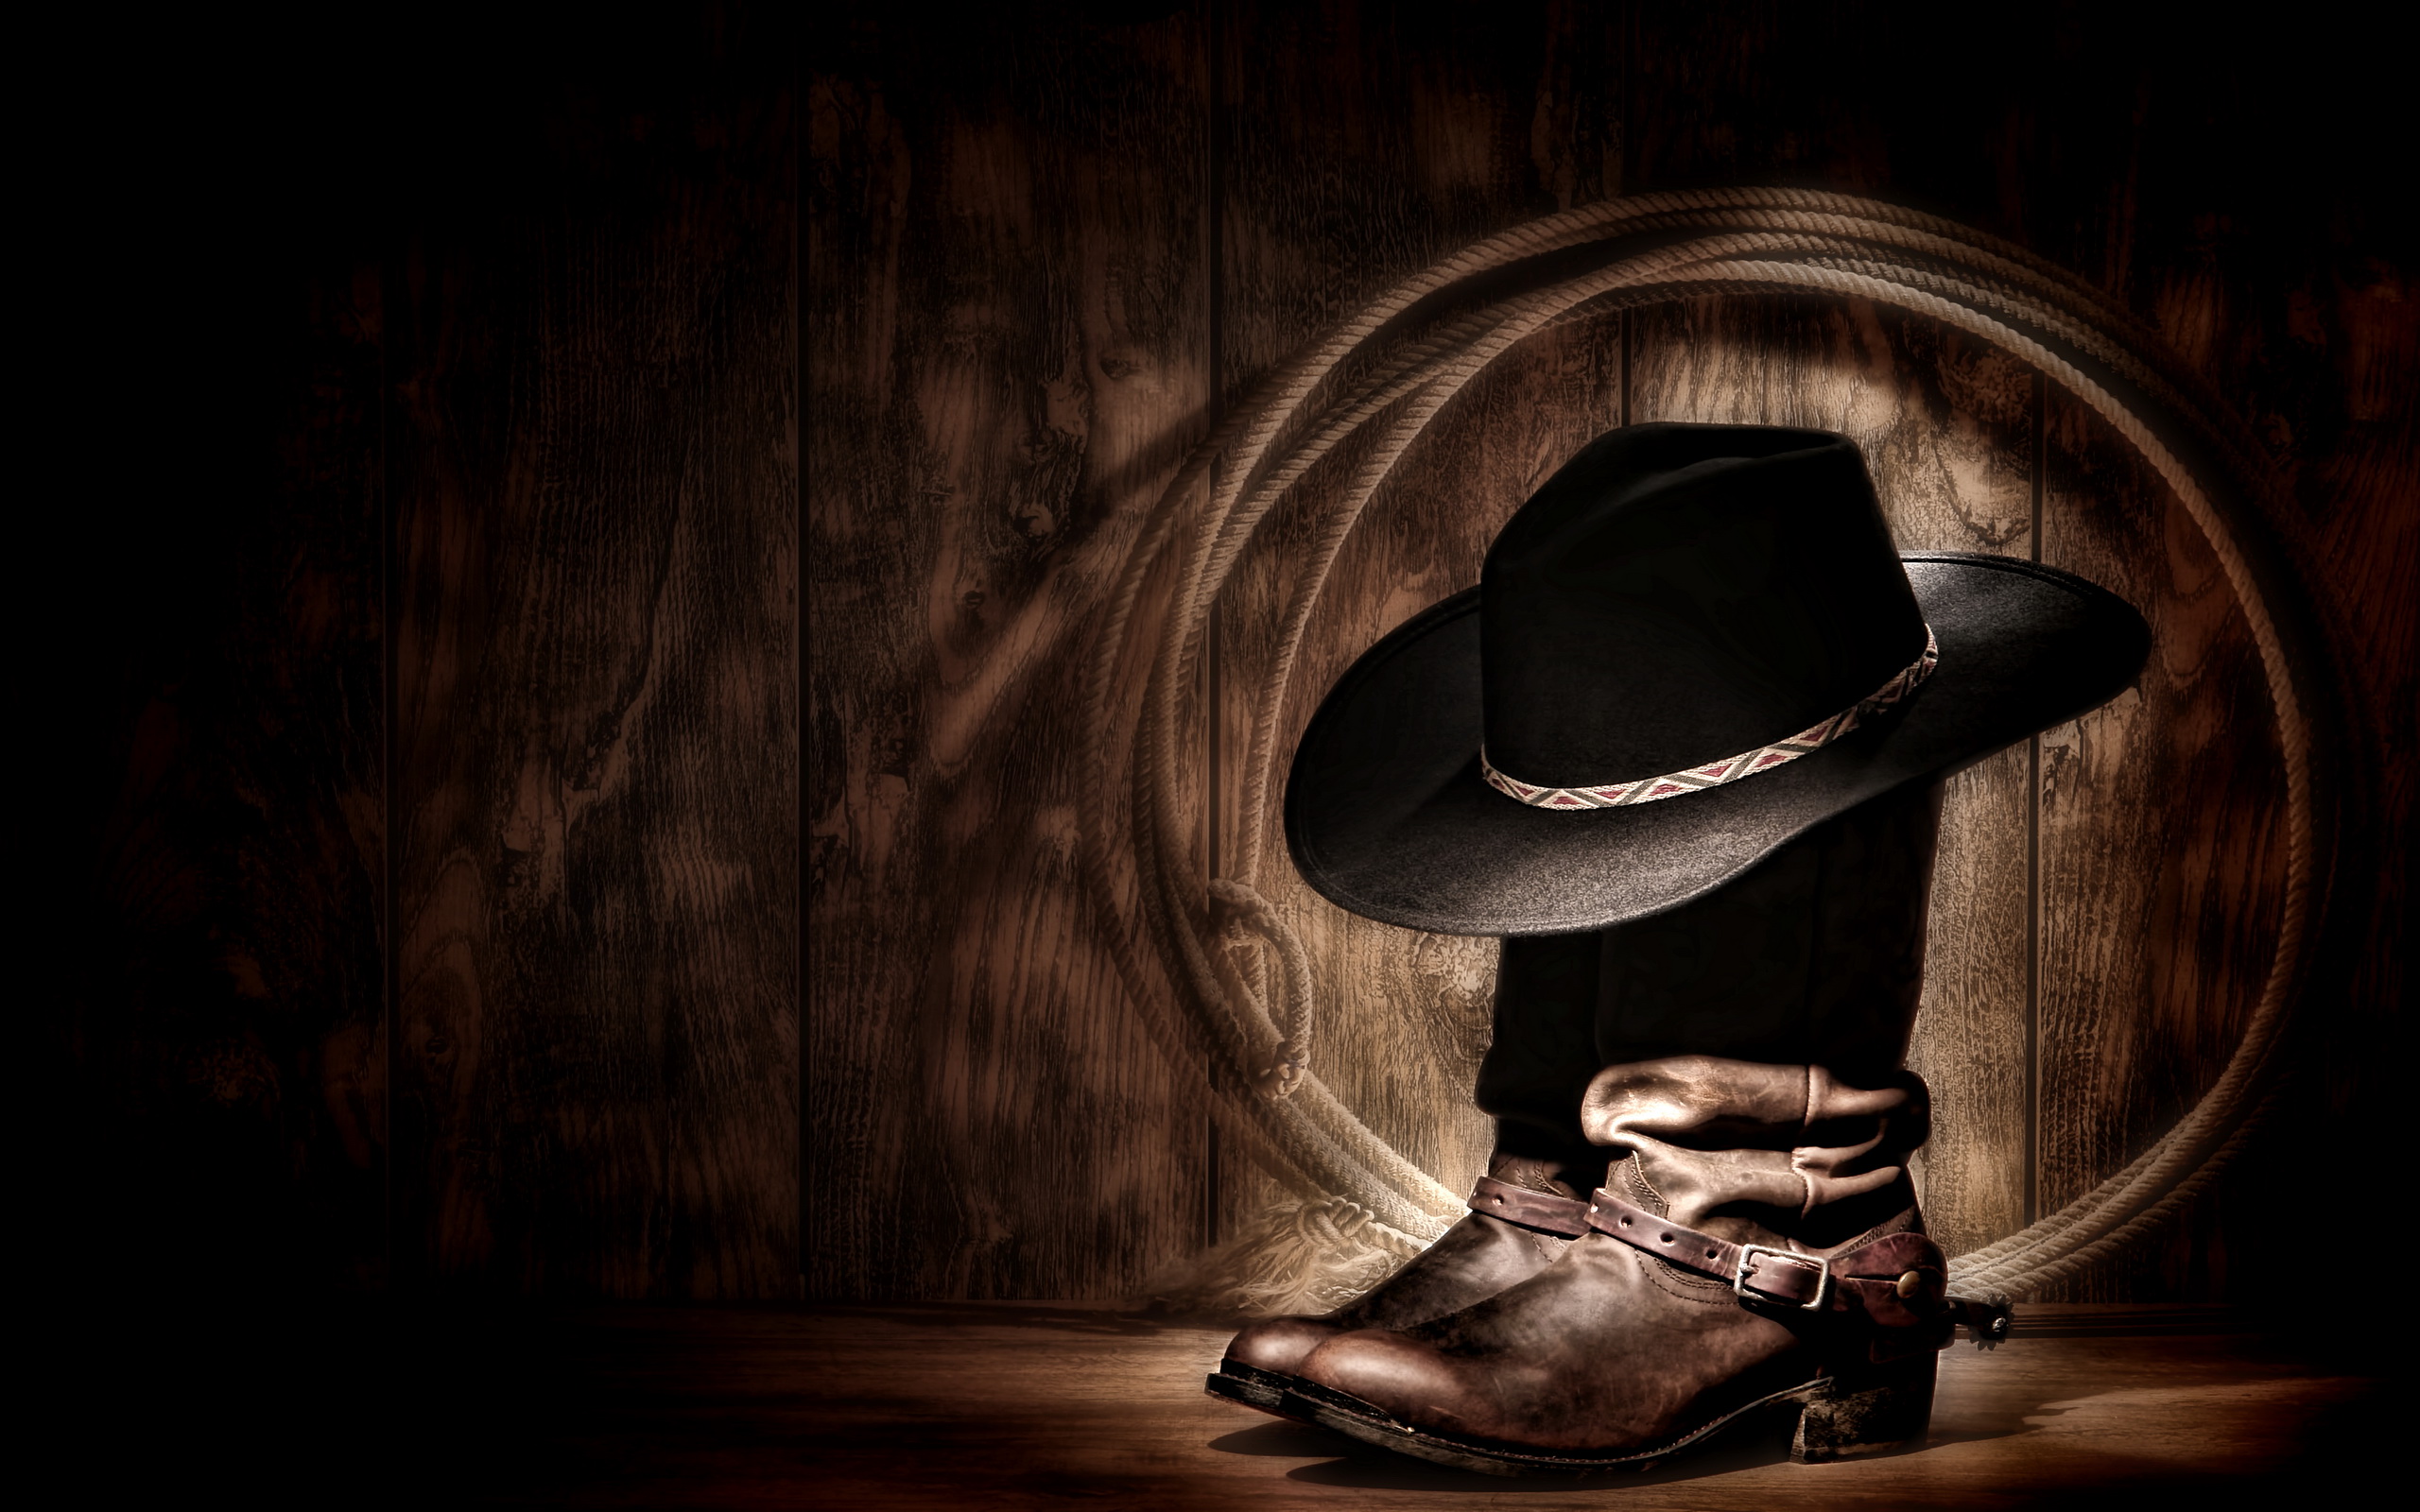 Cowboy Wallpapers Cowboy Backgrounds 2560x1600